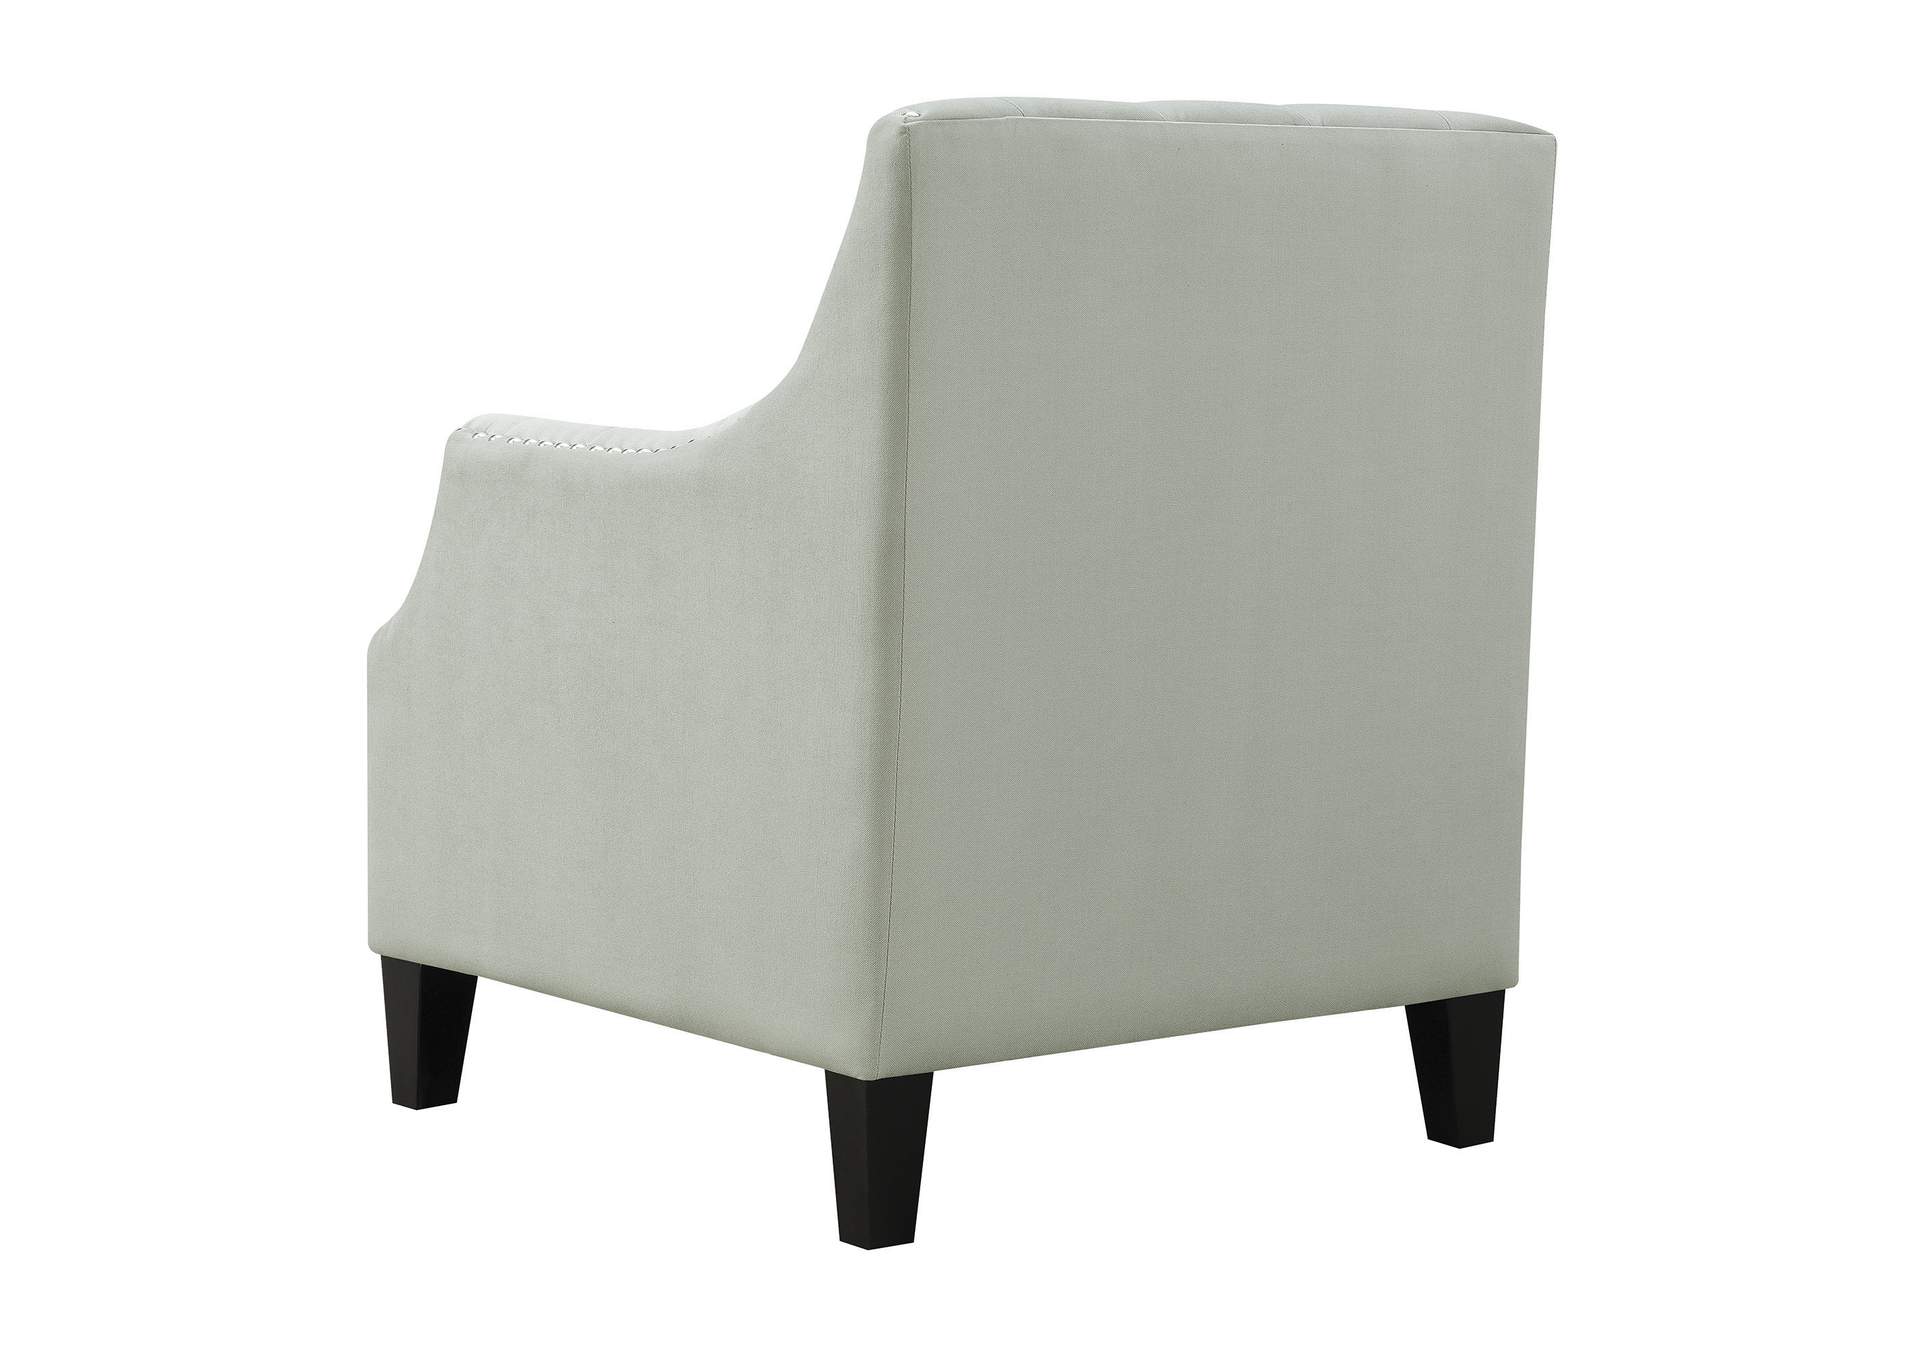 Norway Accent Chair Ottoman Pumice,Elements